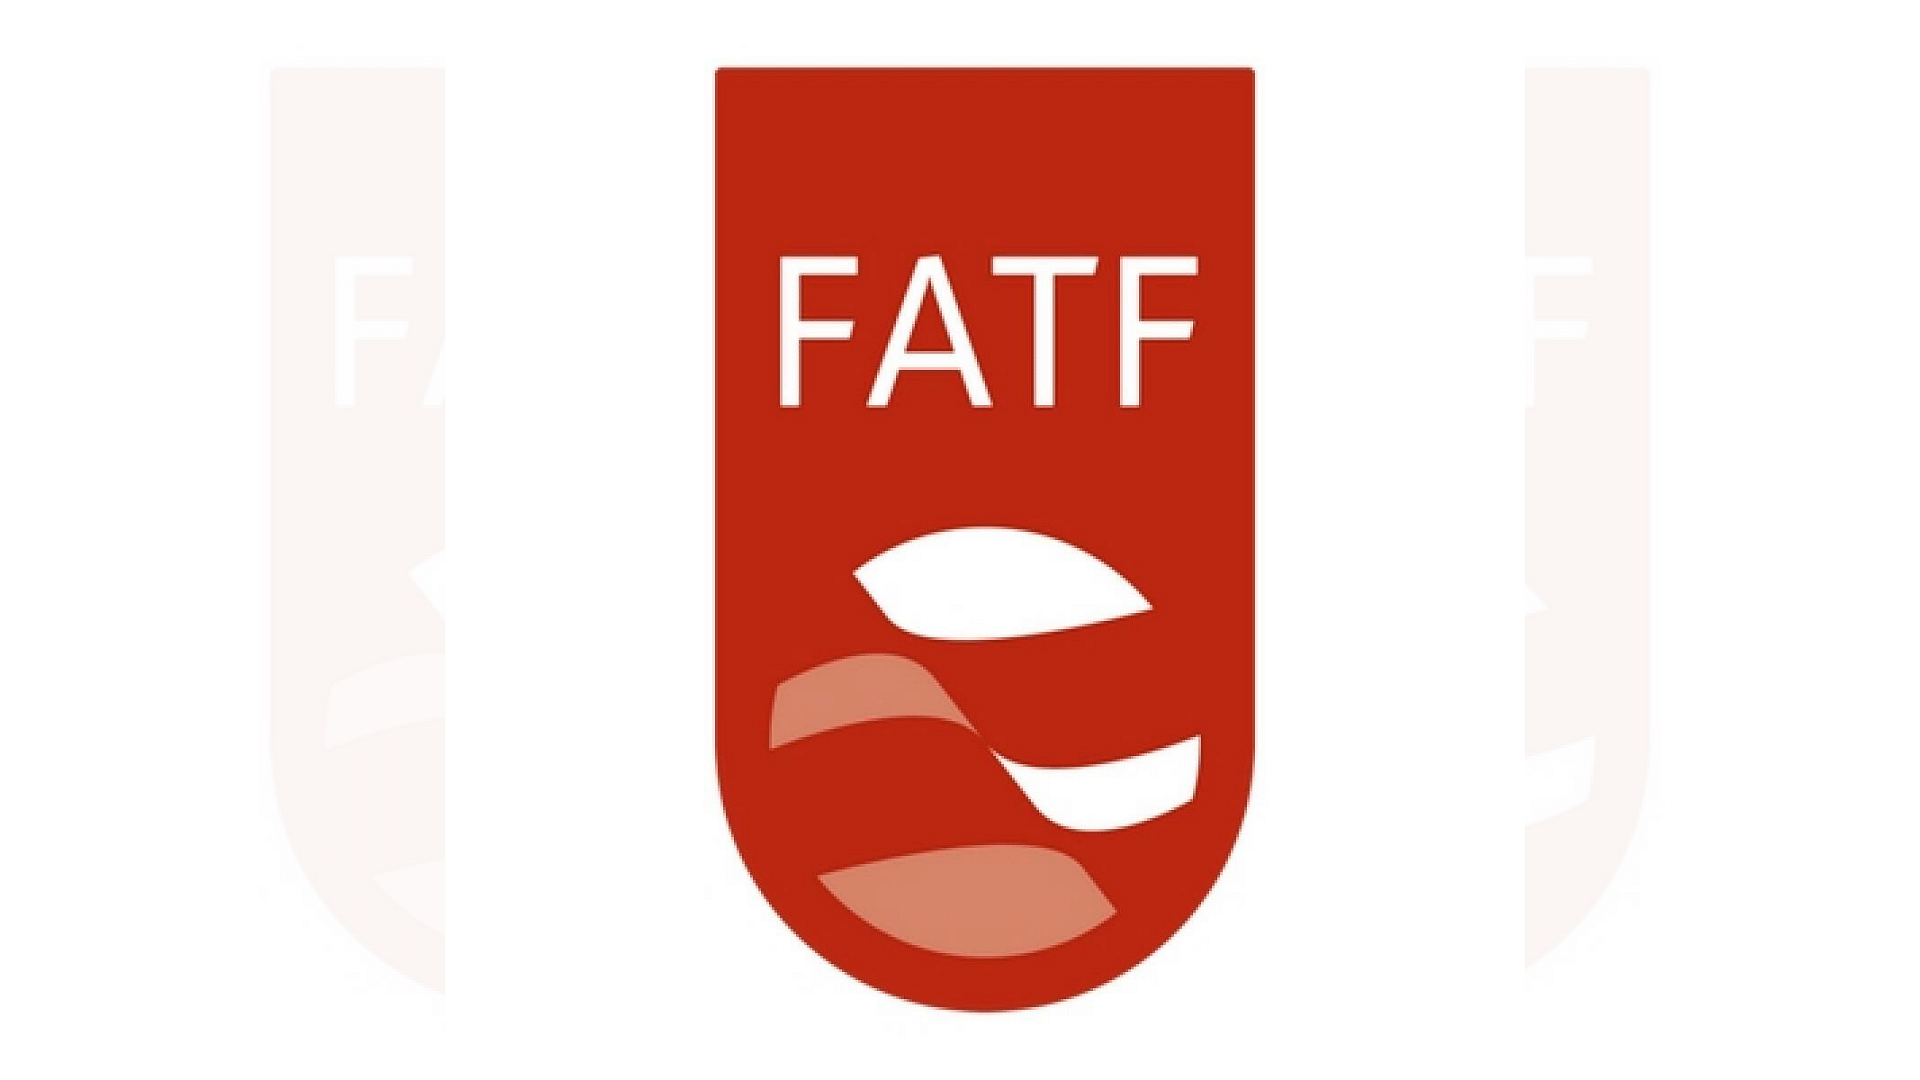 The FATF on Monday, 17 February, said several terrorist groups continue to benefit from funds raised through illegal activities and from supporters worldwide.